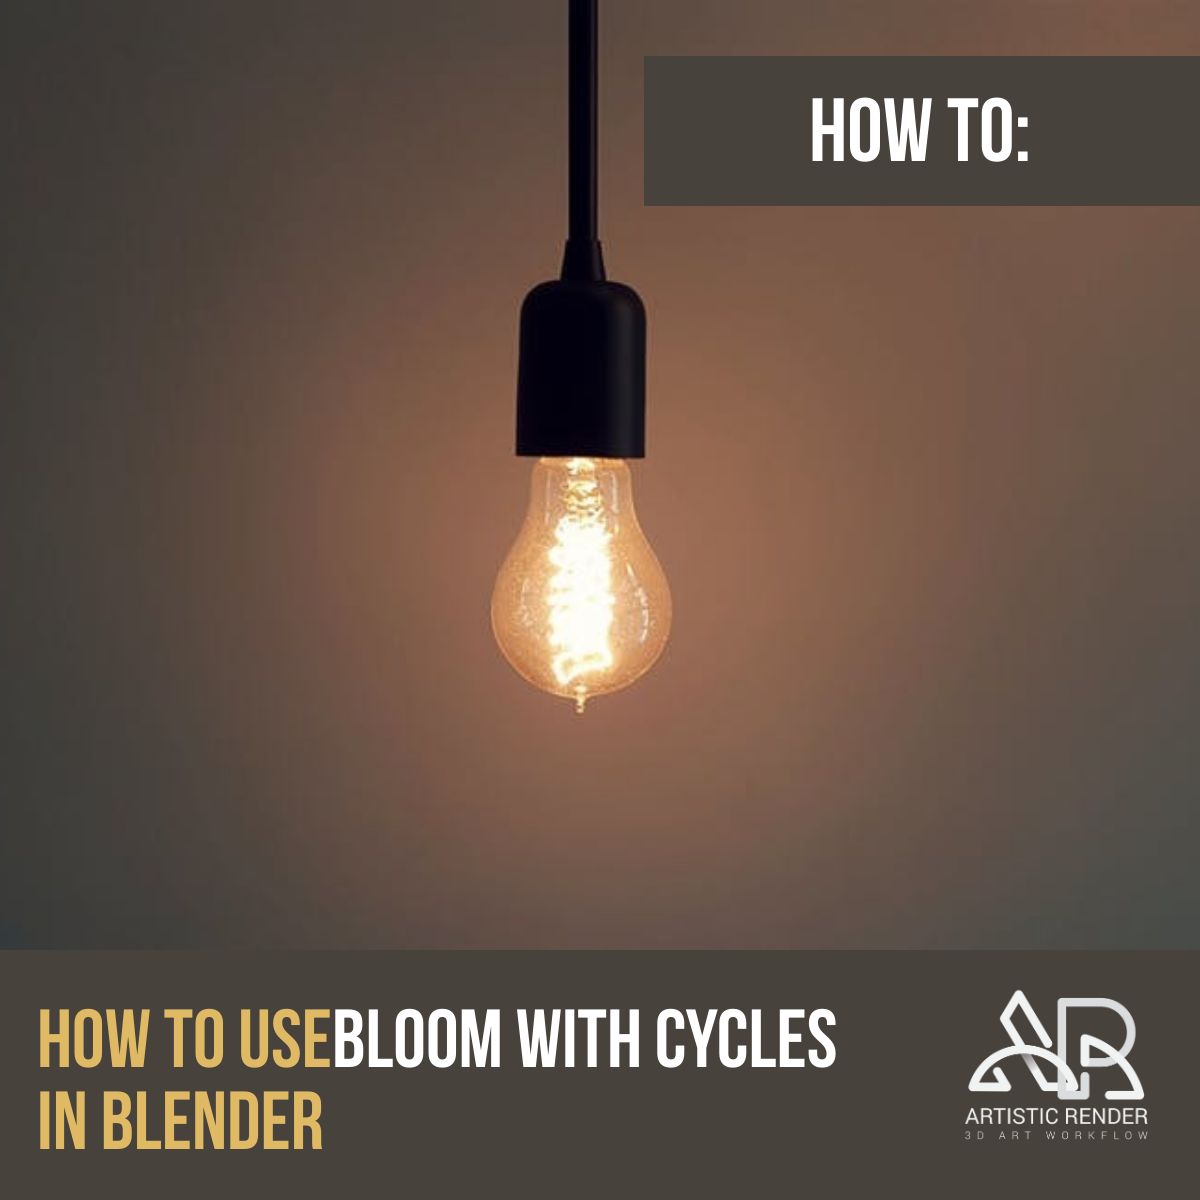 https://artisticrender.com/wp-content/uploads/2020/06/how-to-use-bloom-with-cycles-in-blender-1200x1200-feature.png